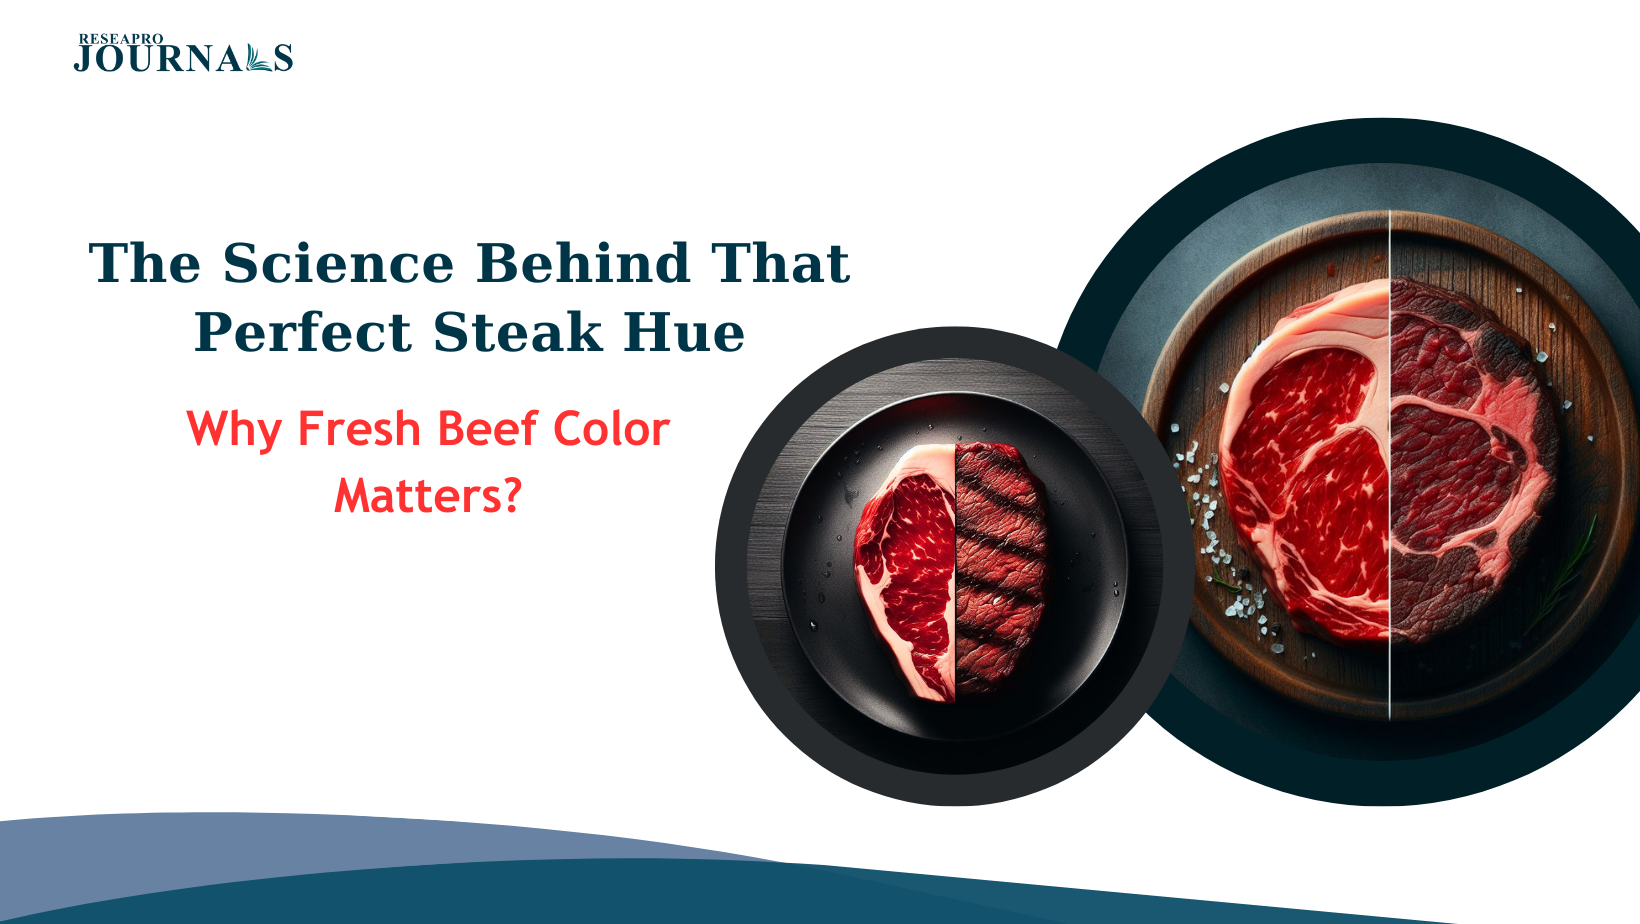 The Science Behind That Perfect Steak Hue: Why Fresh Beef Color Matters